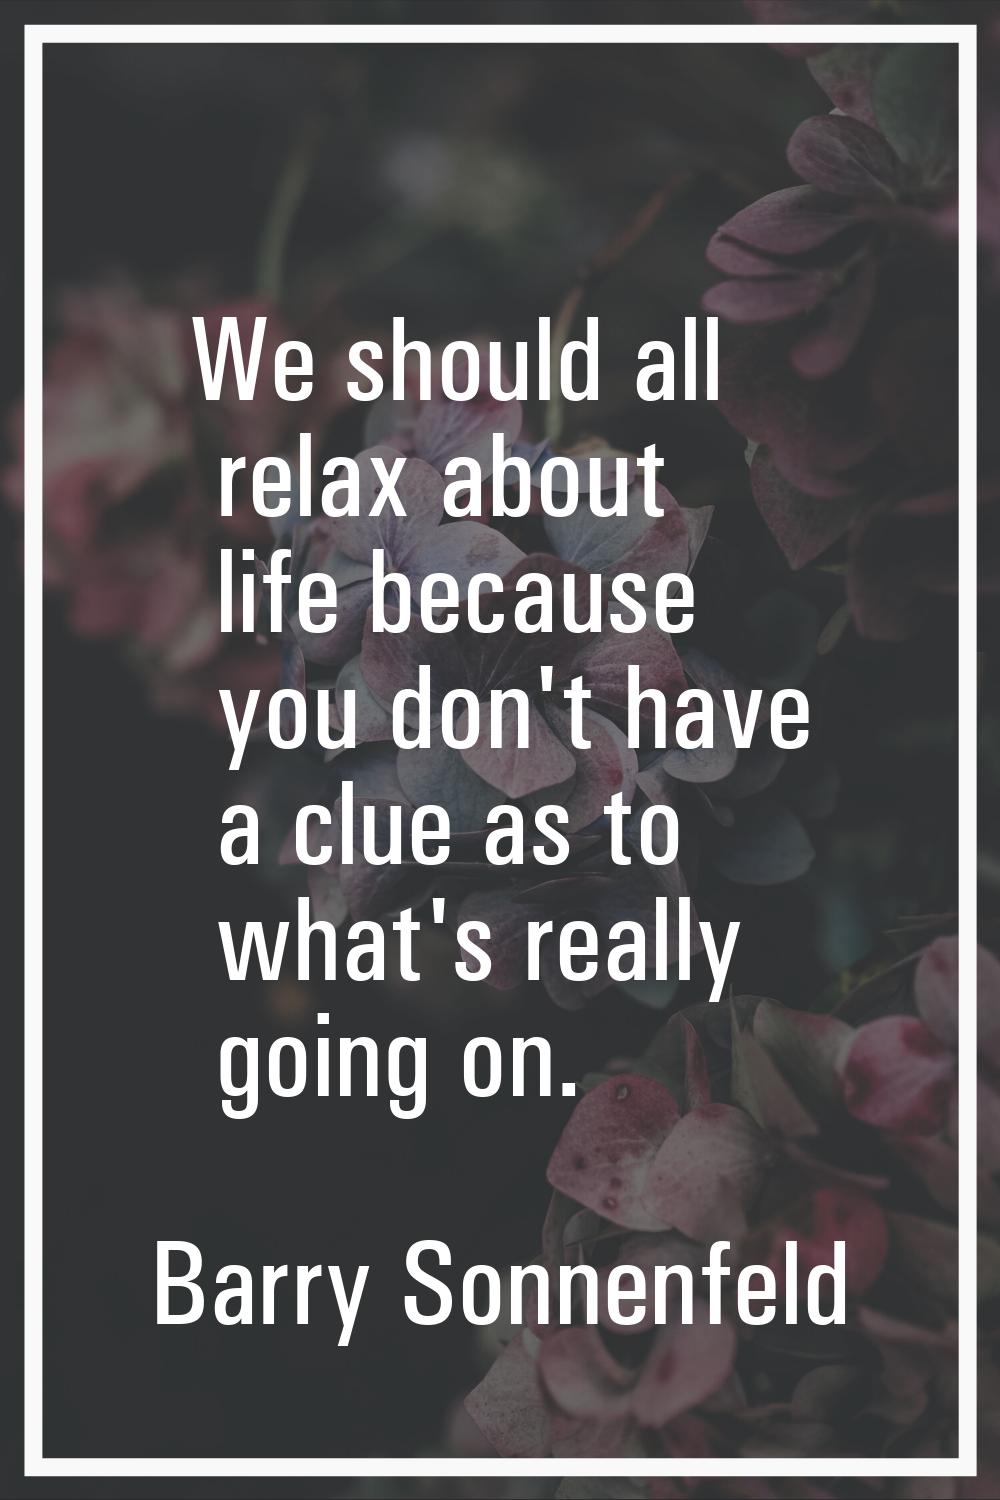 We should all relax about life because you don't have a clue as to what's really going on.